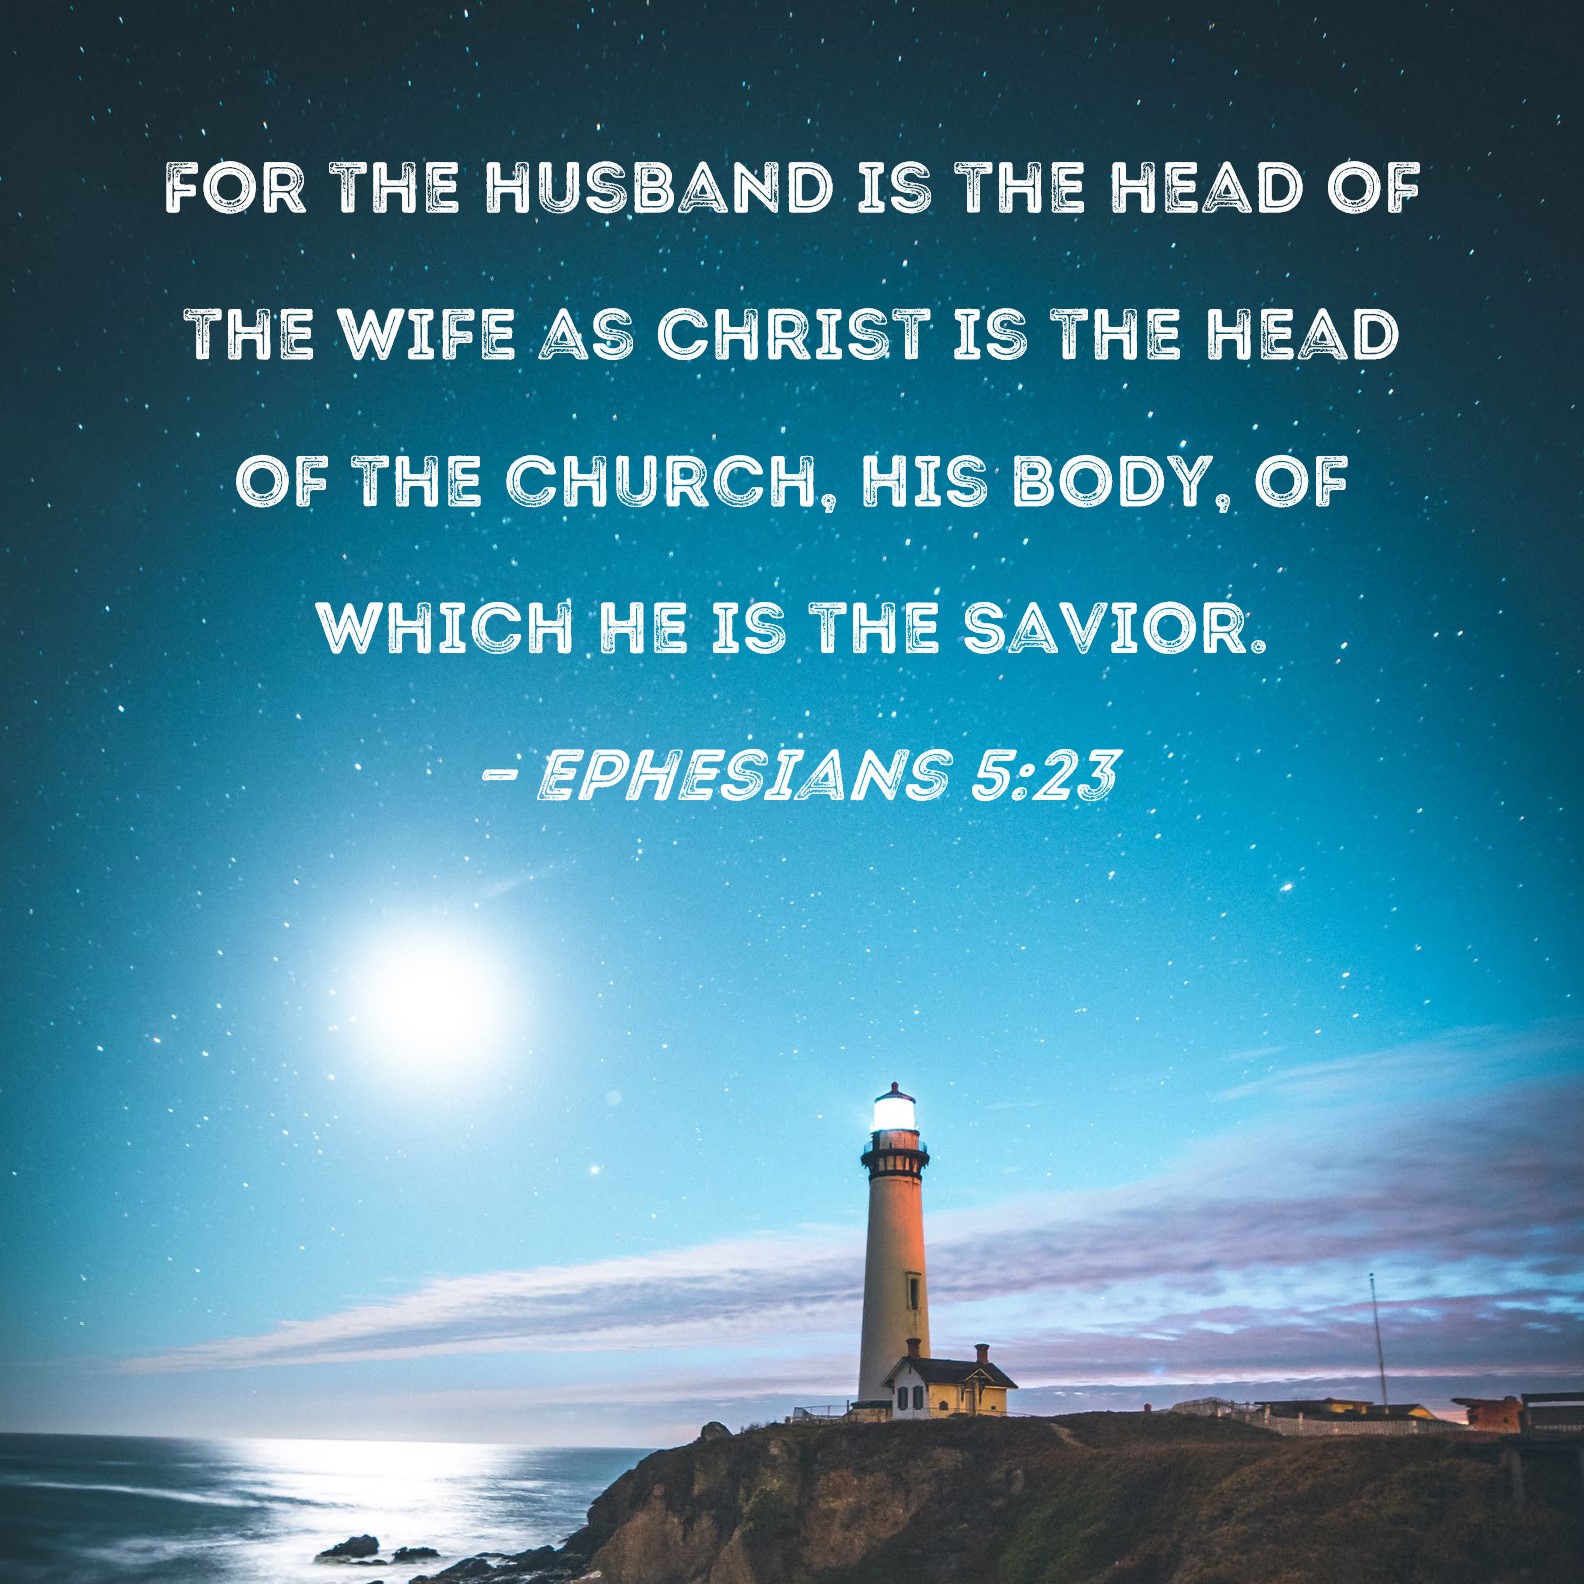 Ephesians 523 For the husband is the head of the wife as Christ is the head of the church, His body, of which He is the Savior. image